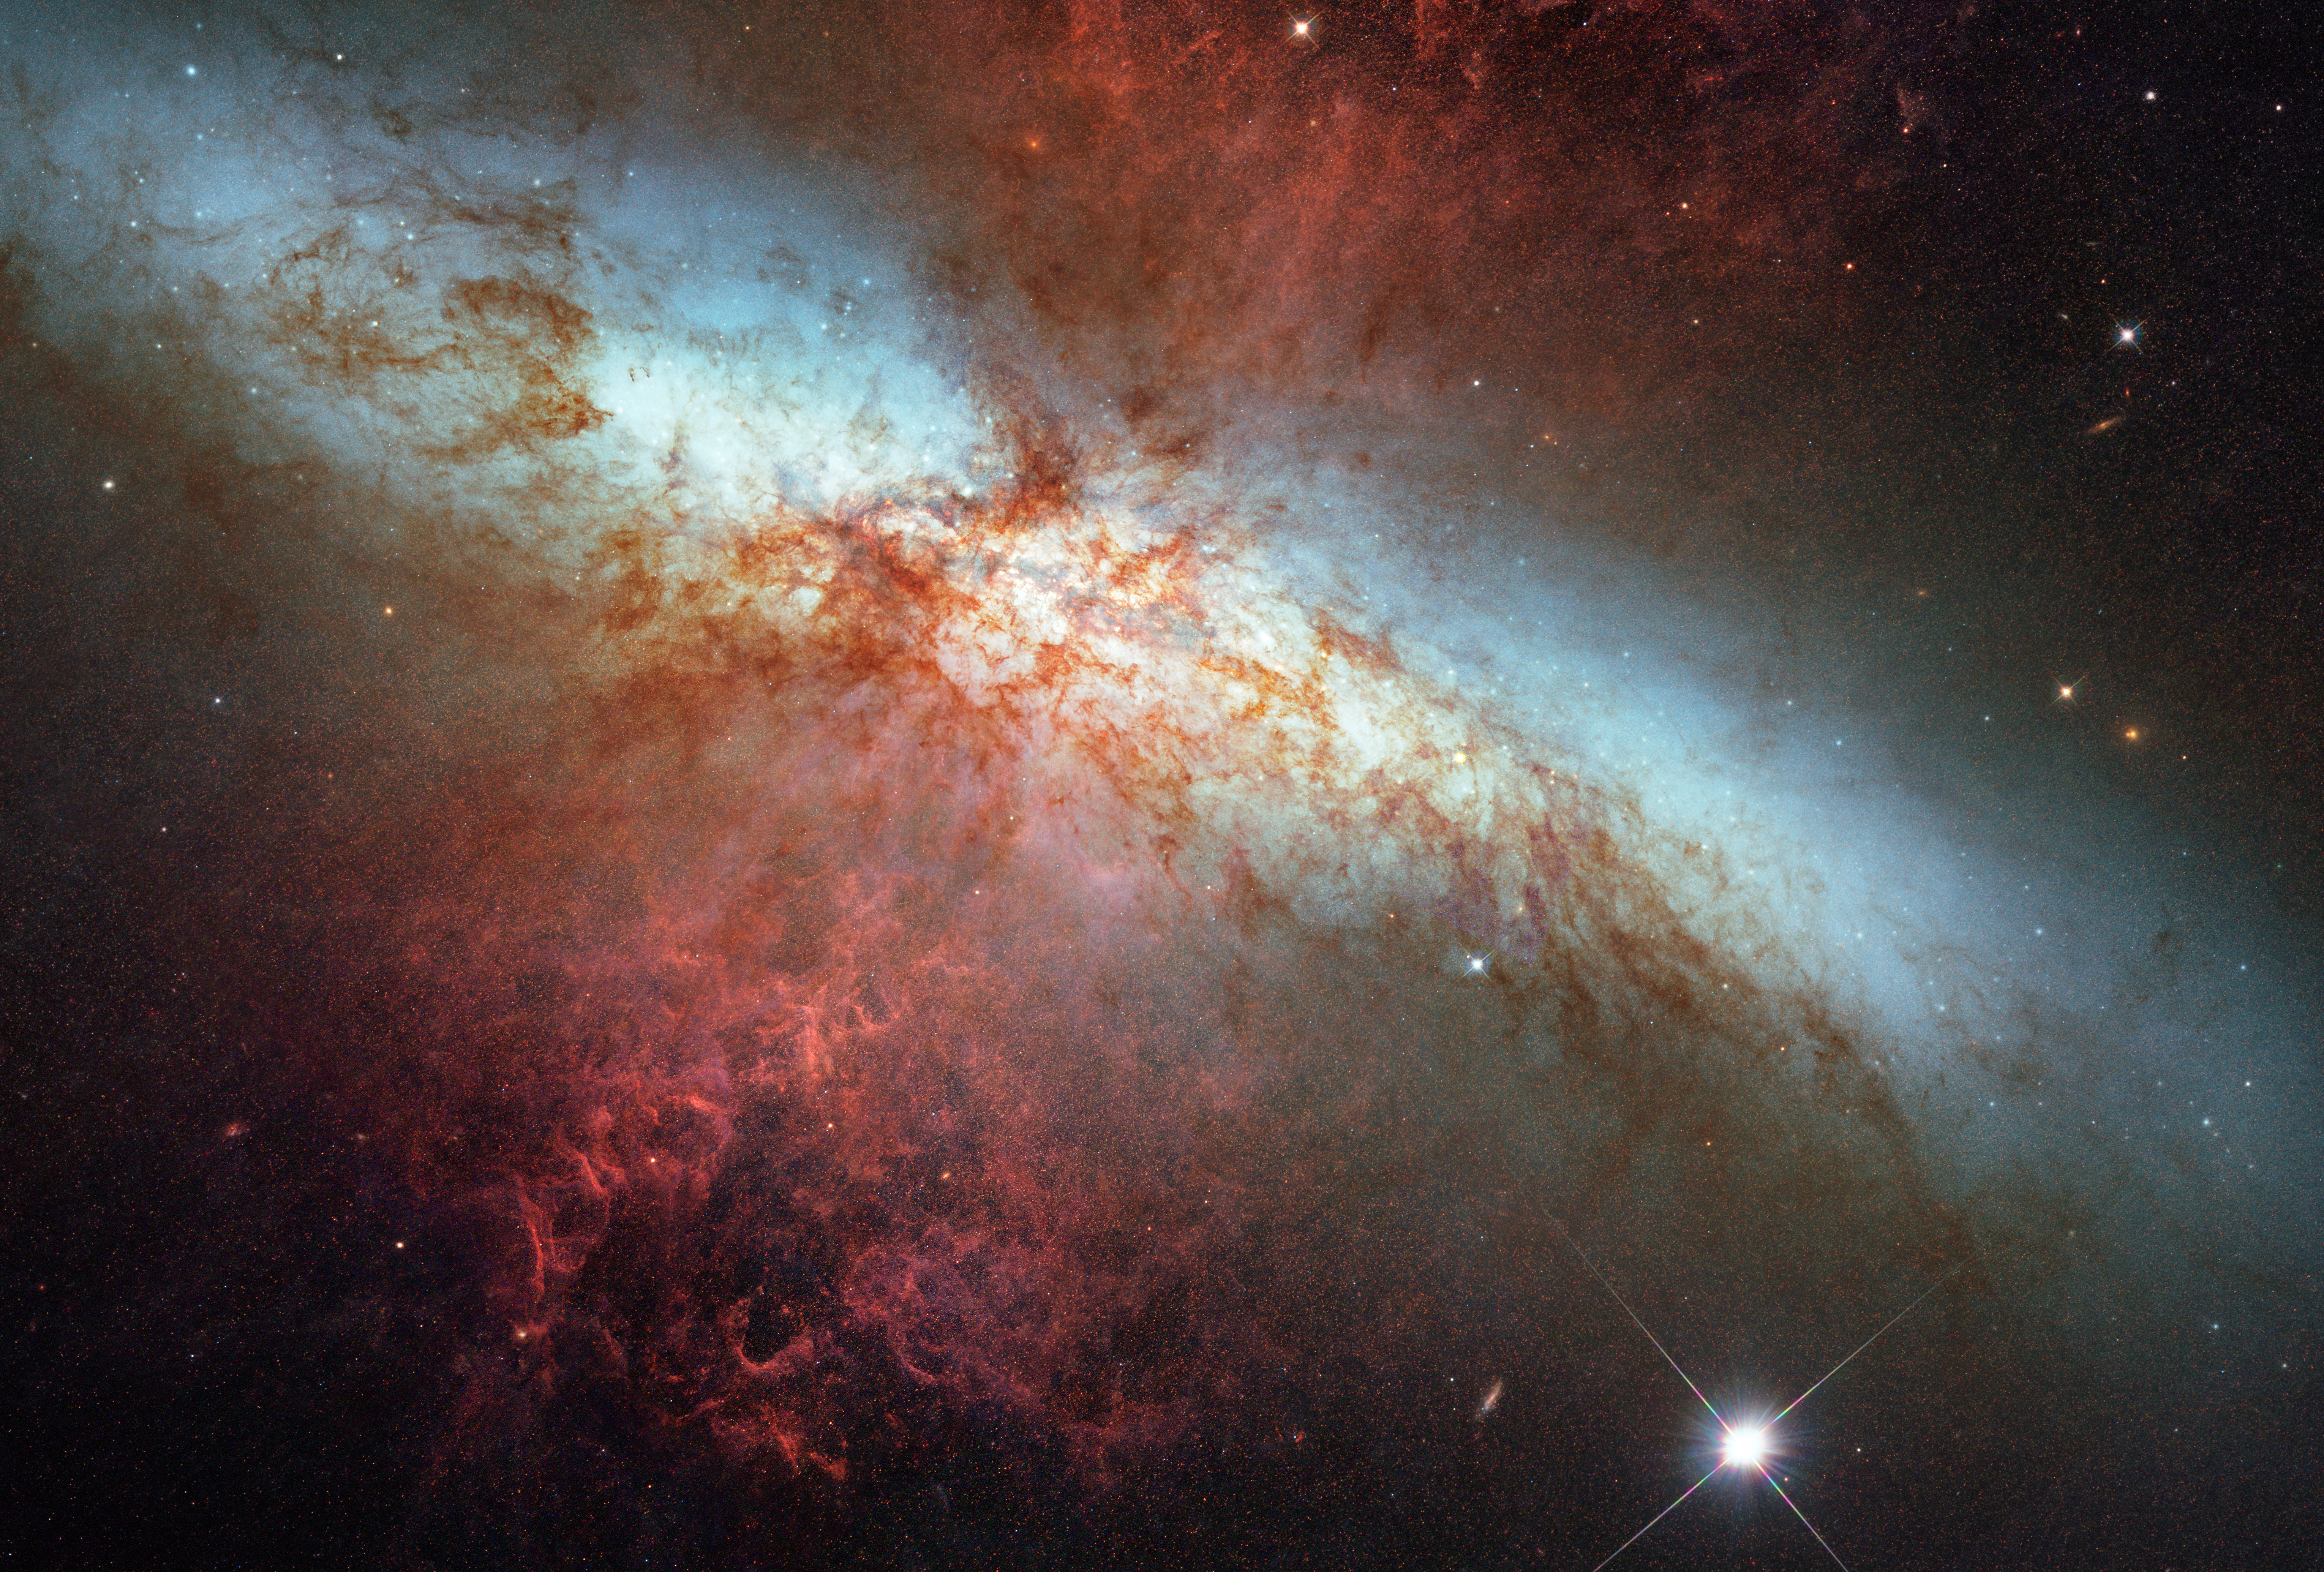 This is a Hubble Space Telescope composite image of a supernova explosion in the galaxy M82. At a distance of approximately 11.5 million light-years from Earth it is the closest supernova of its type discovered in the past few decades.